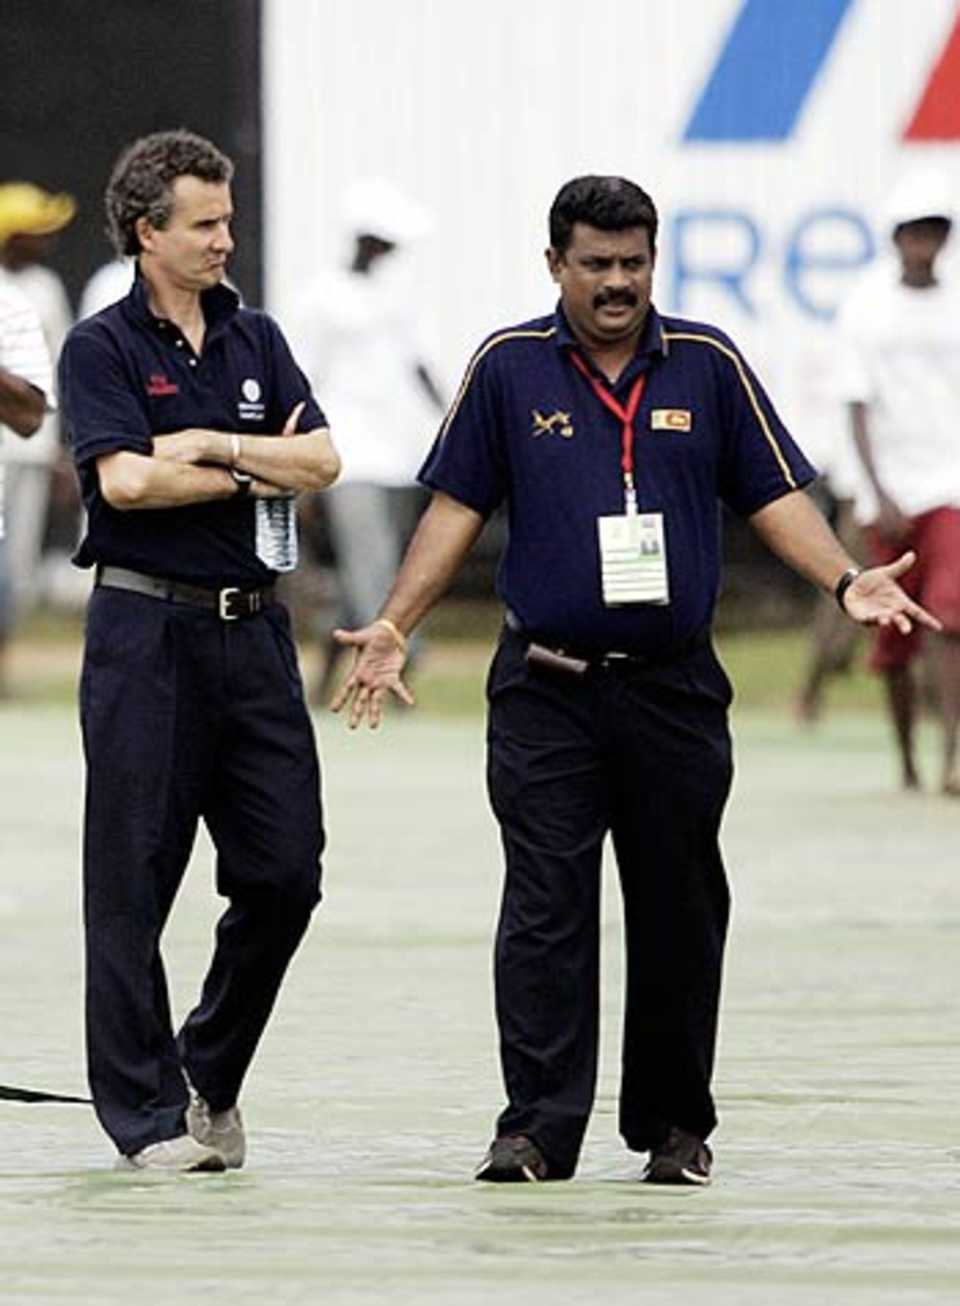 Billy Bowden does an inspection along with an official at the Sinhalese Sports Club